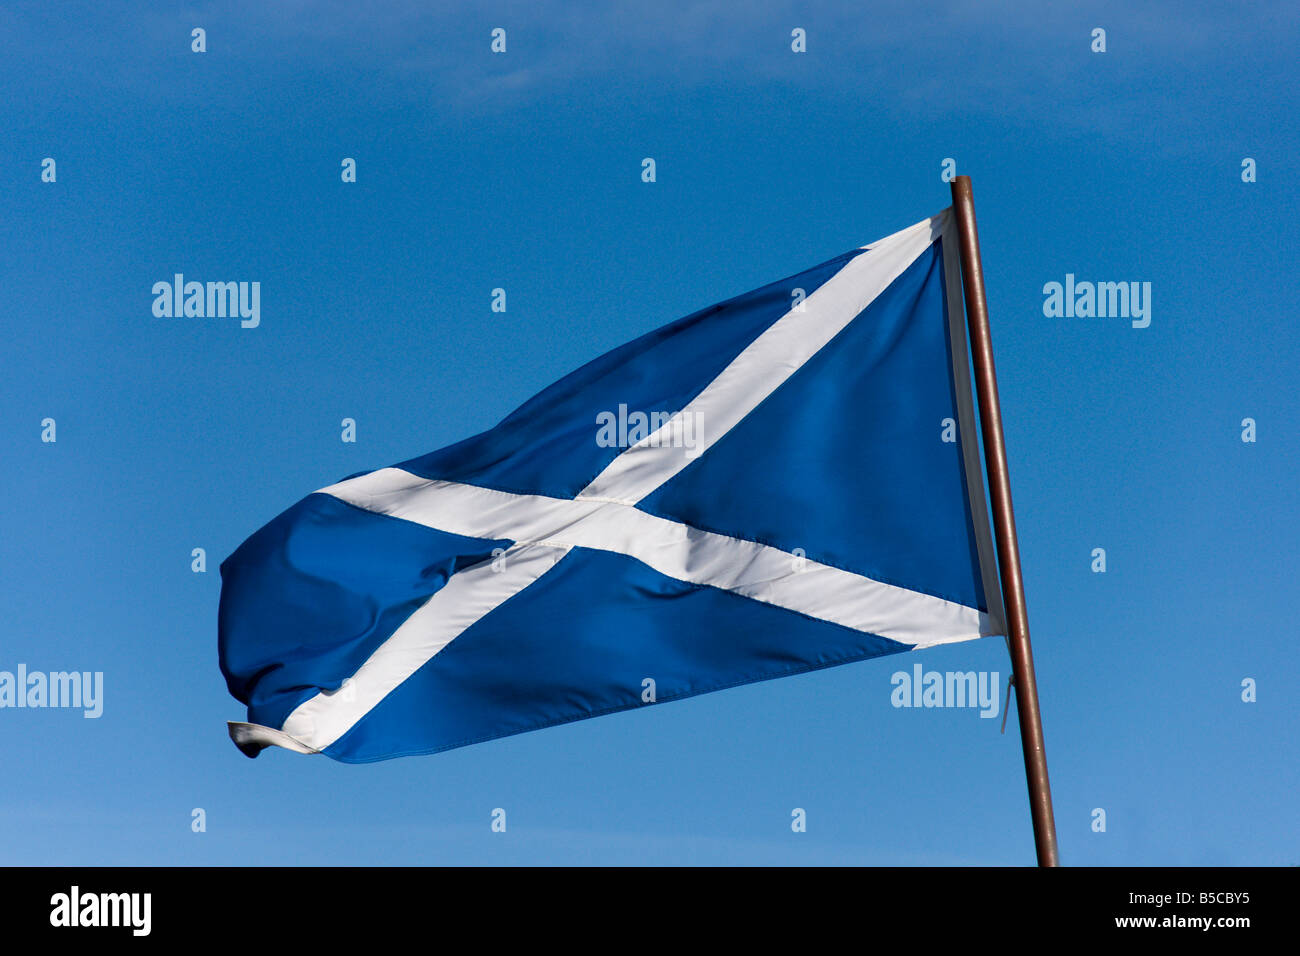 Scots flag Saltire St Andrews cross blue sky flying - direction left image may be flipped to suit layout Stock Photo